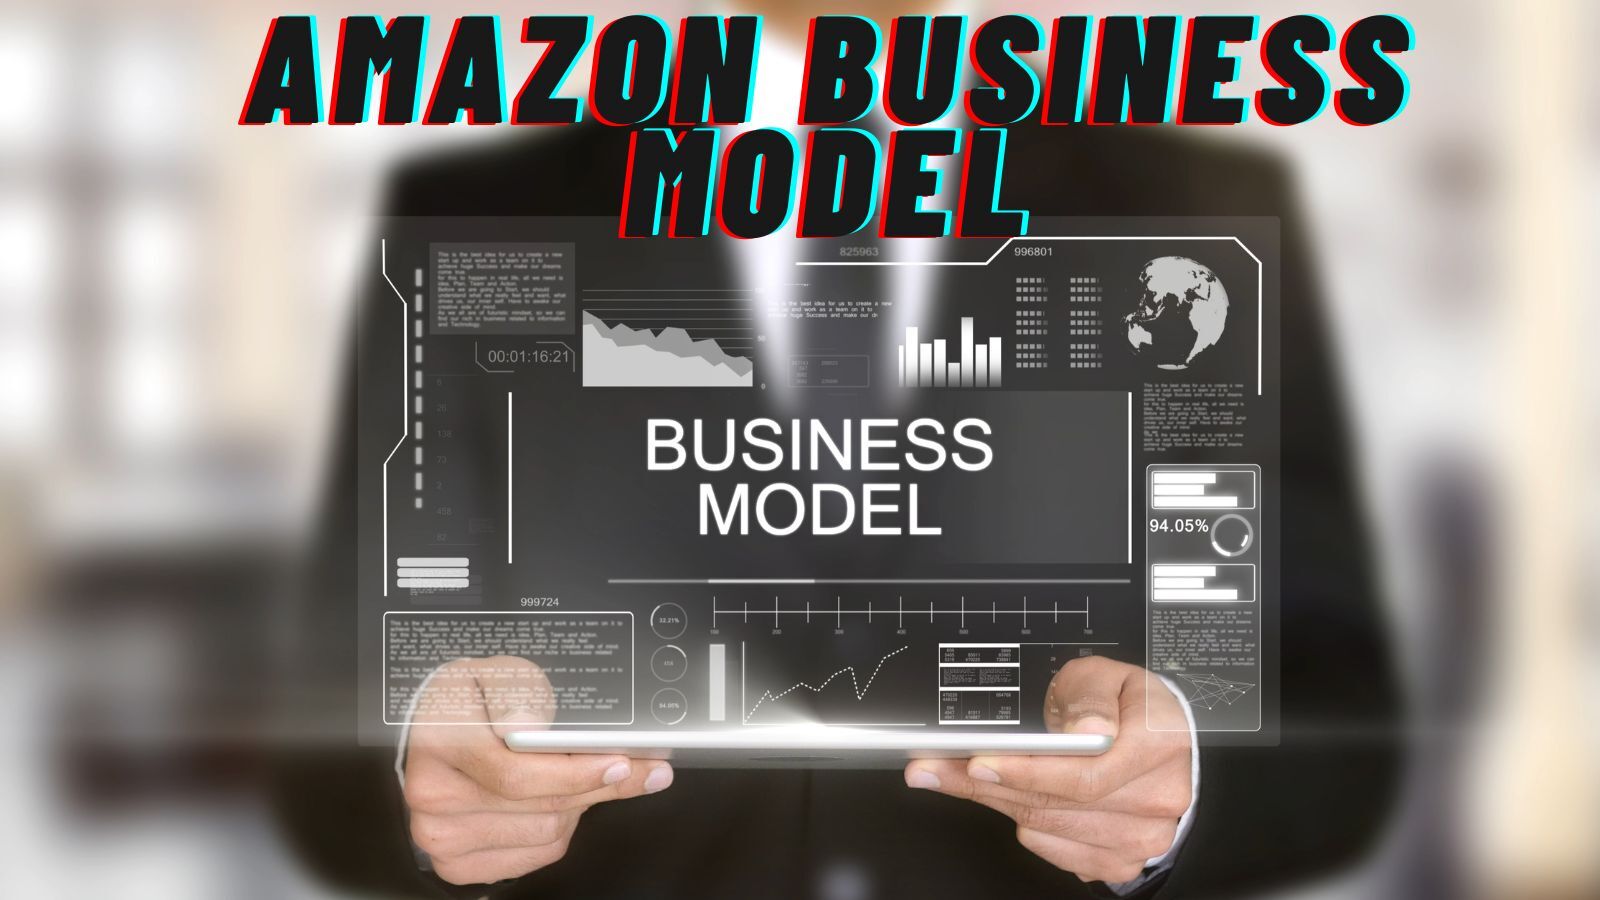 Amazon Business Model (Everything You Always Wanted to Know)